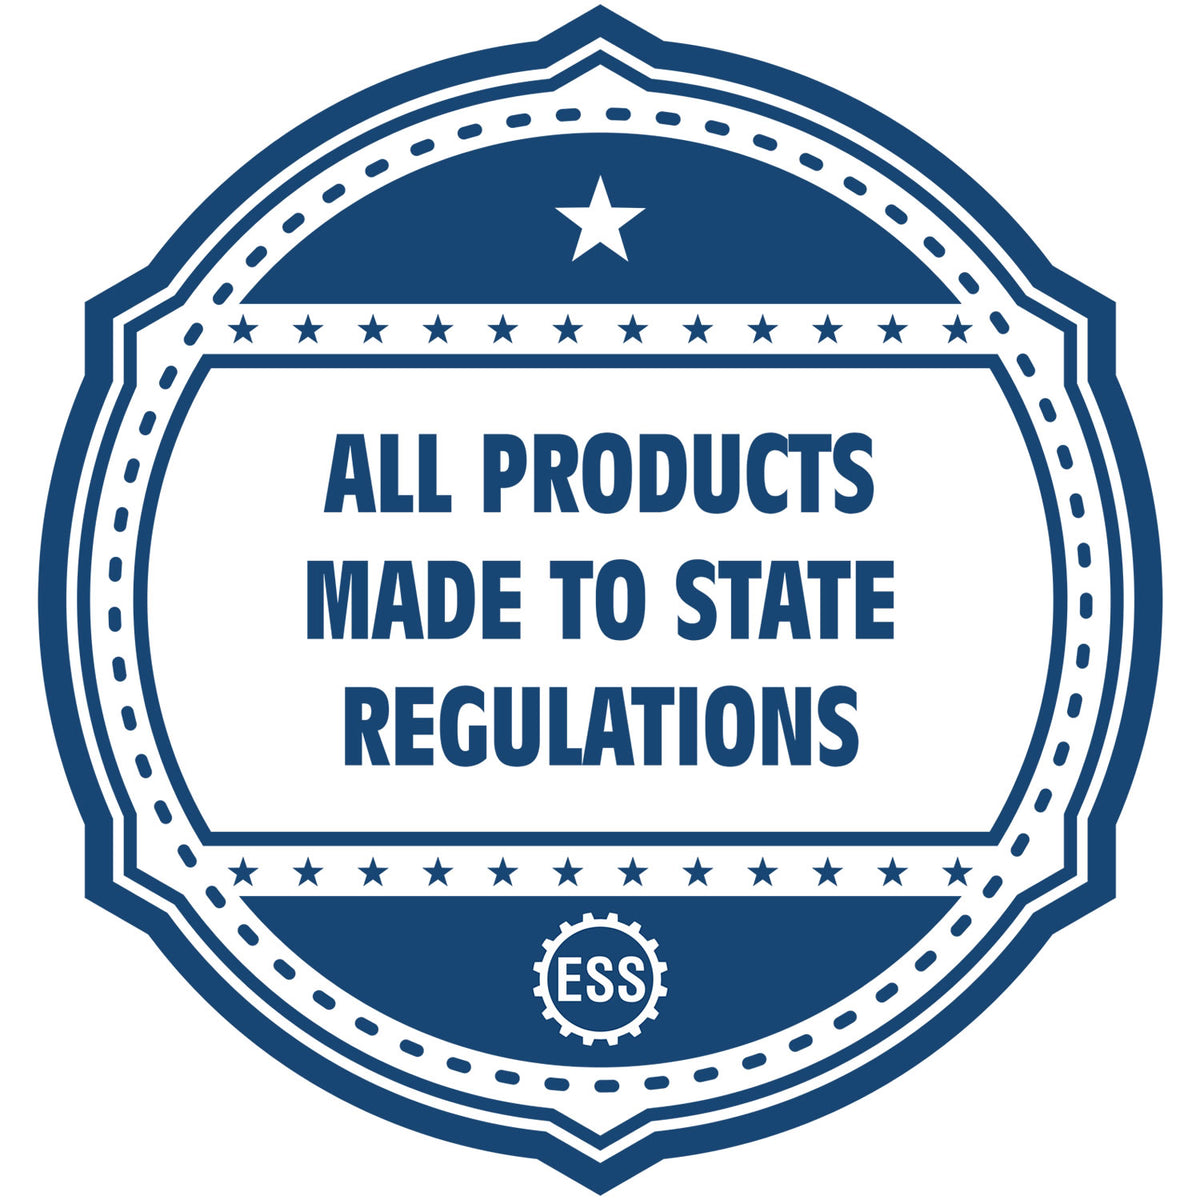 An icon or badge element for the Heavy-Duty Montana Rectangular Notary Stamp showing that this product is made in compliance with state regulations.